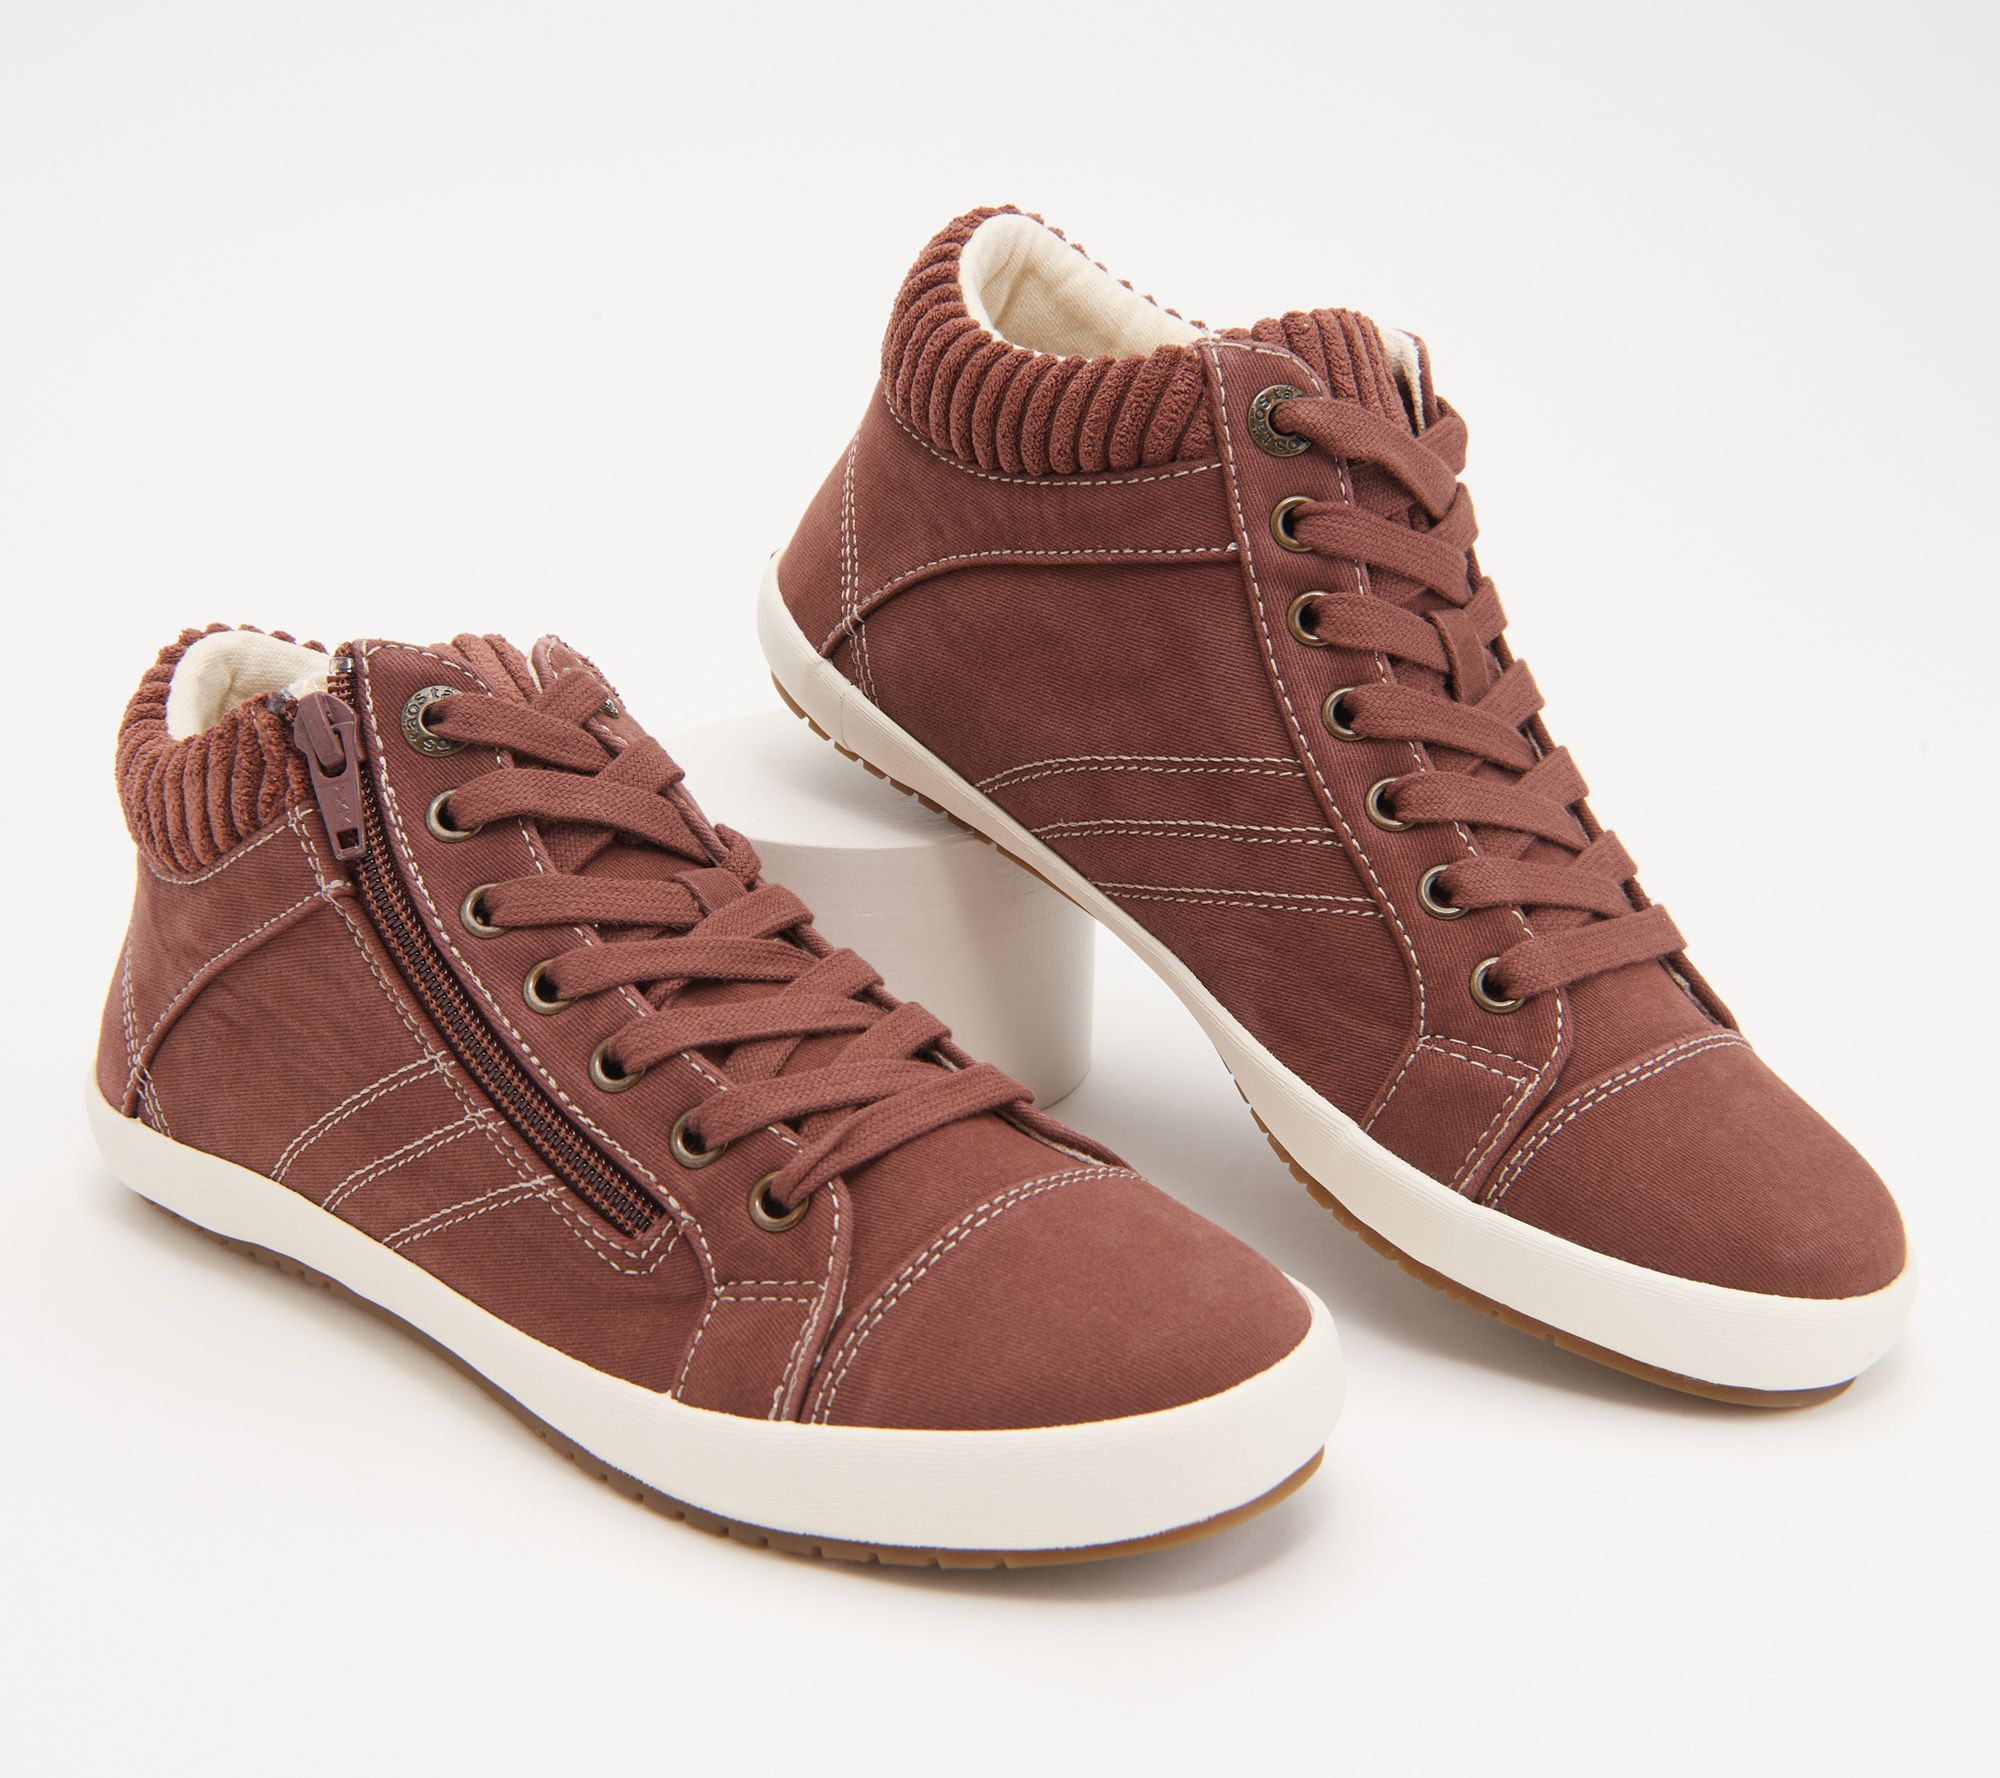 Taos Vintage Canvas Lace-Up Sneakers - Startup - QVC.com